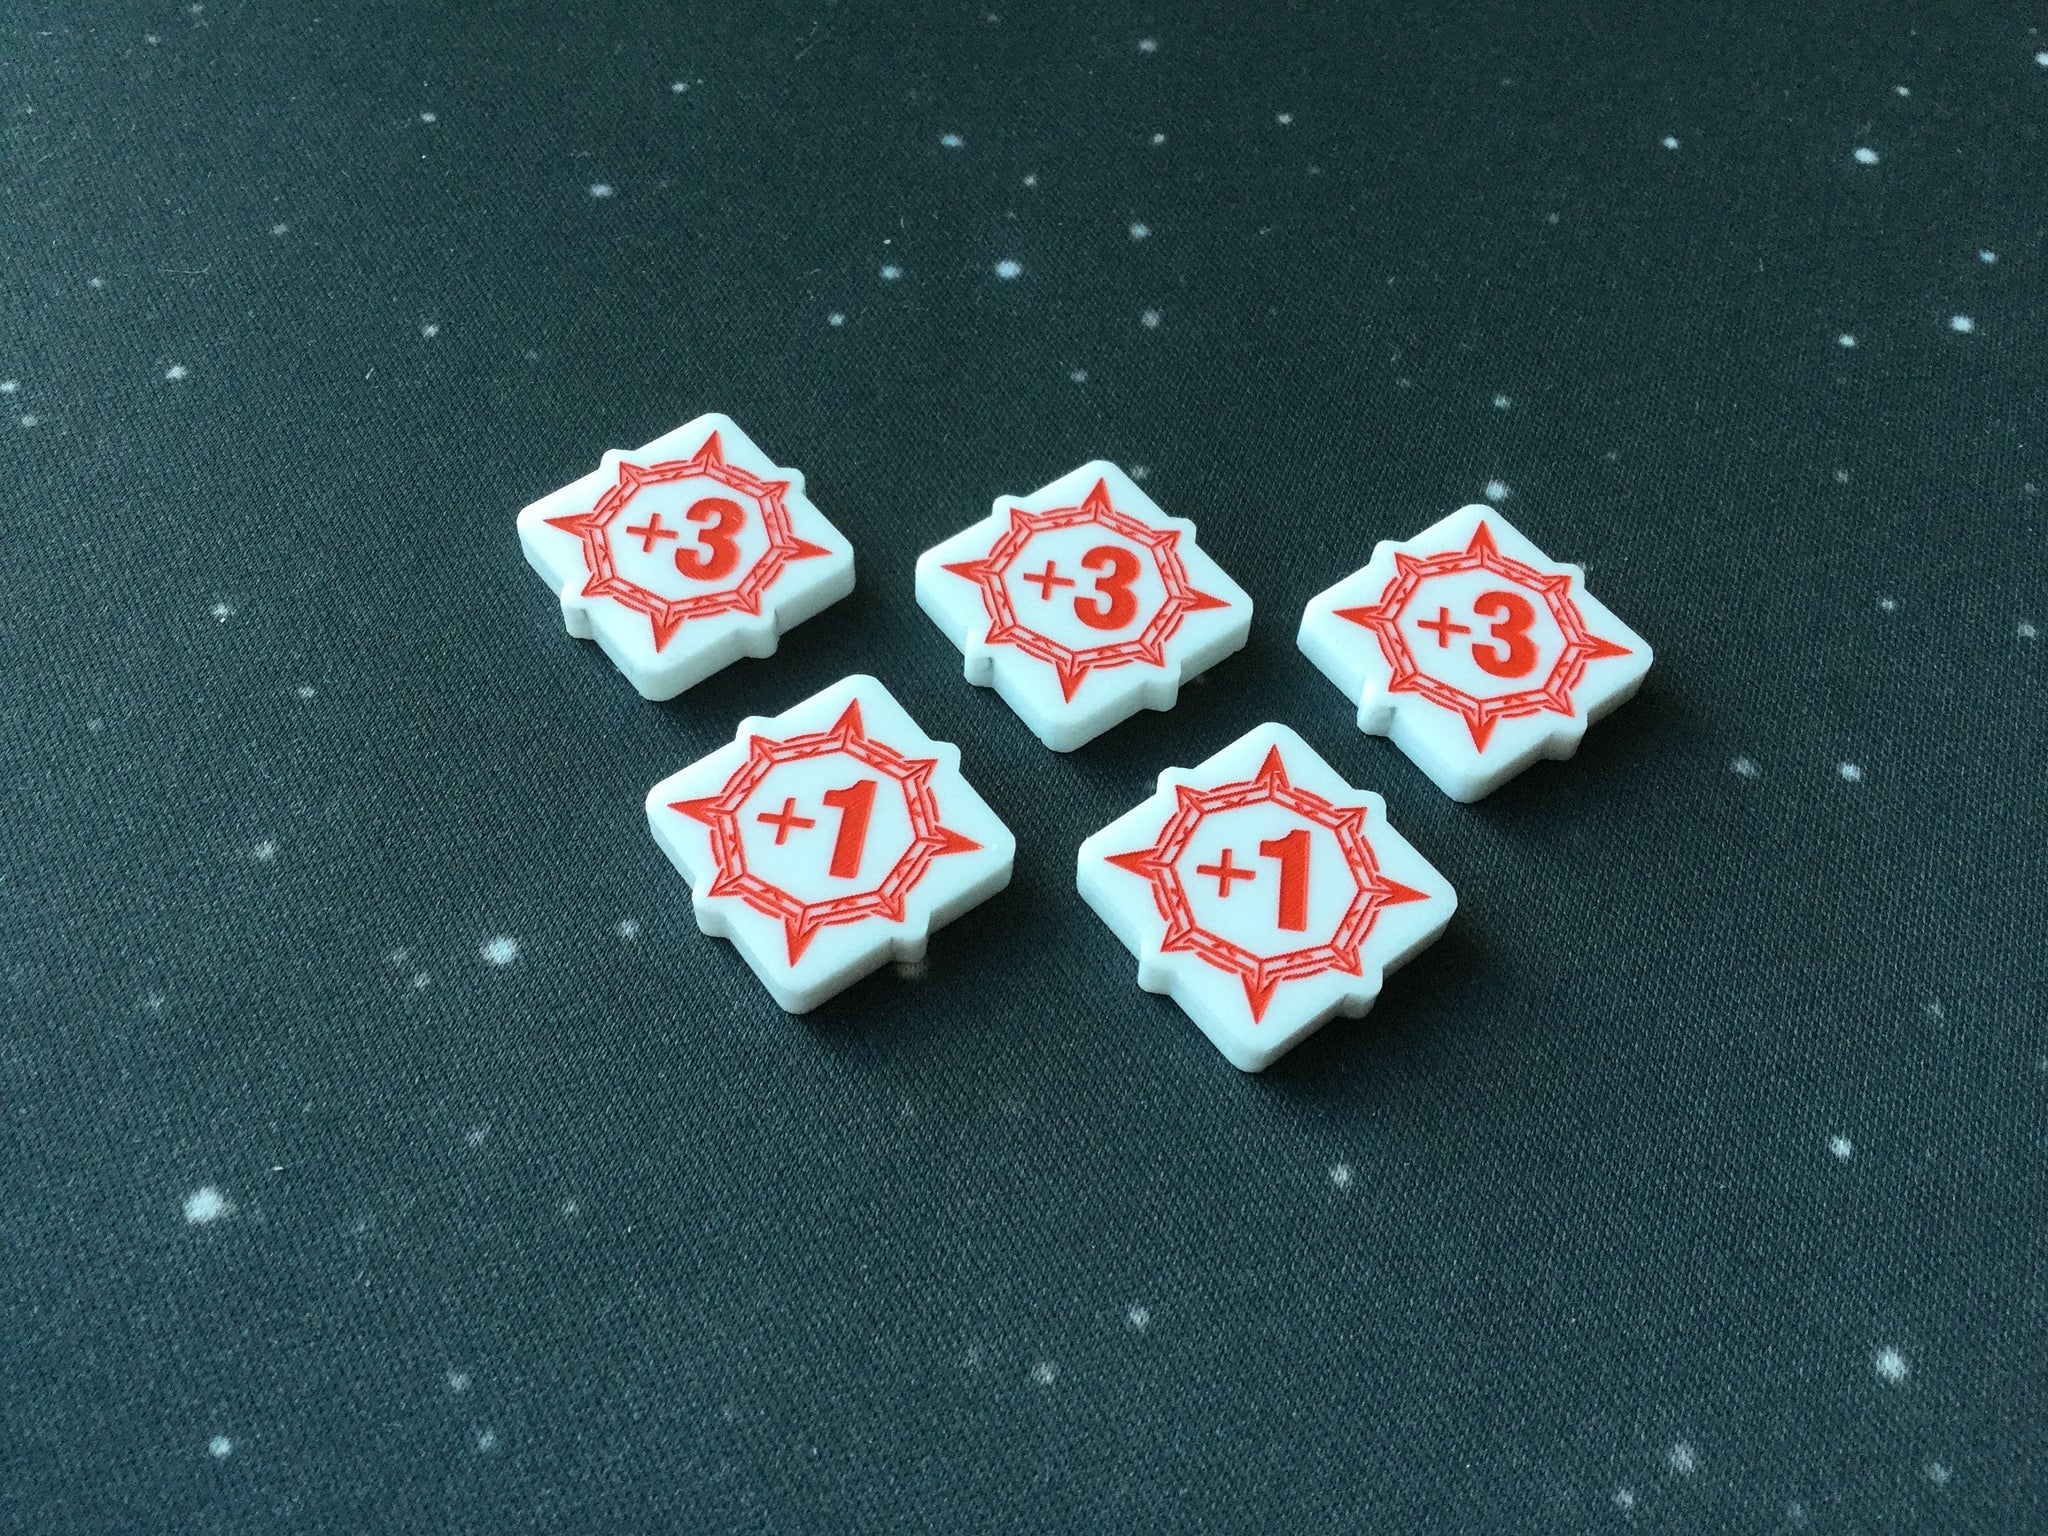 Keyforge compatible, acrylic power tokens